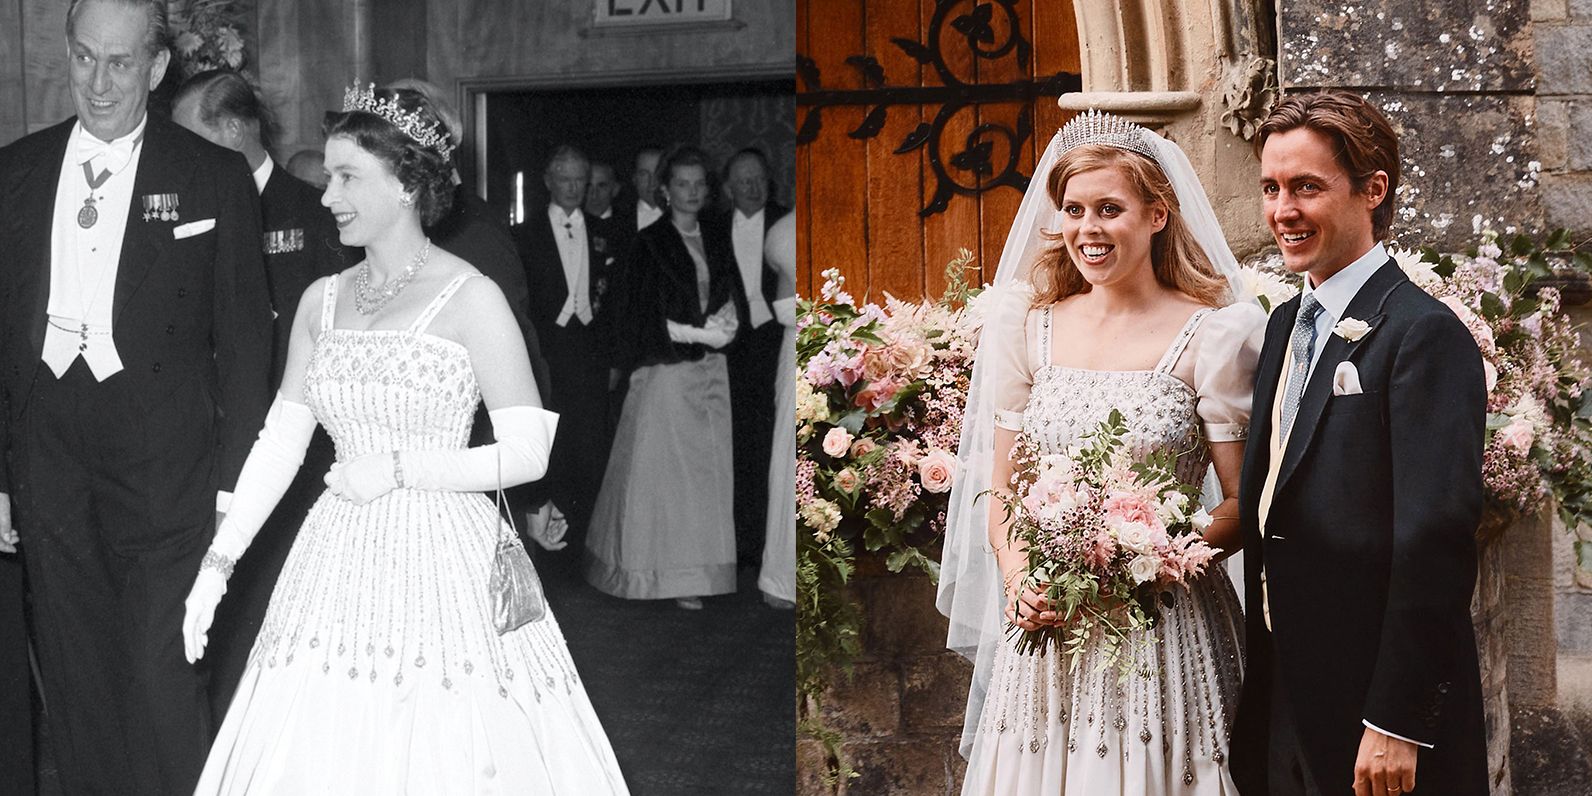 Fashion Icon: Celebrating The Queen's Majestic Style